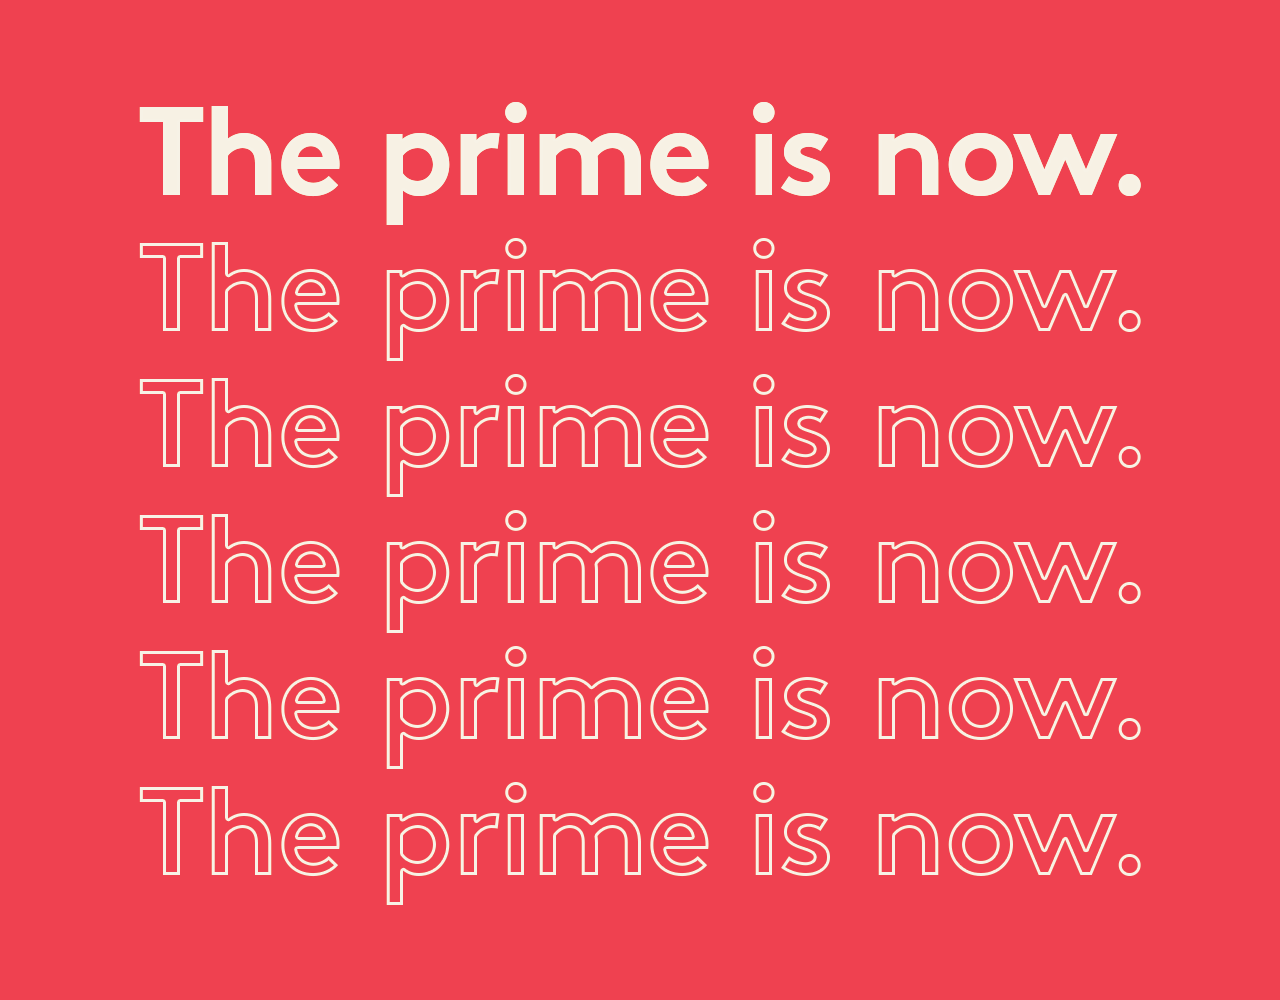 The prime is now.